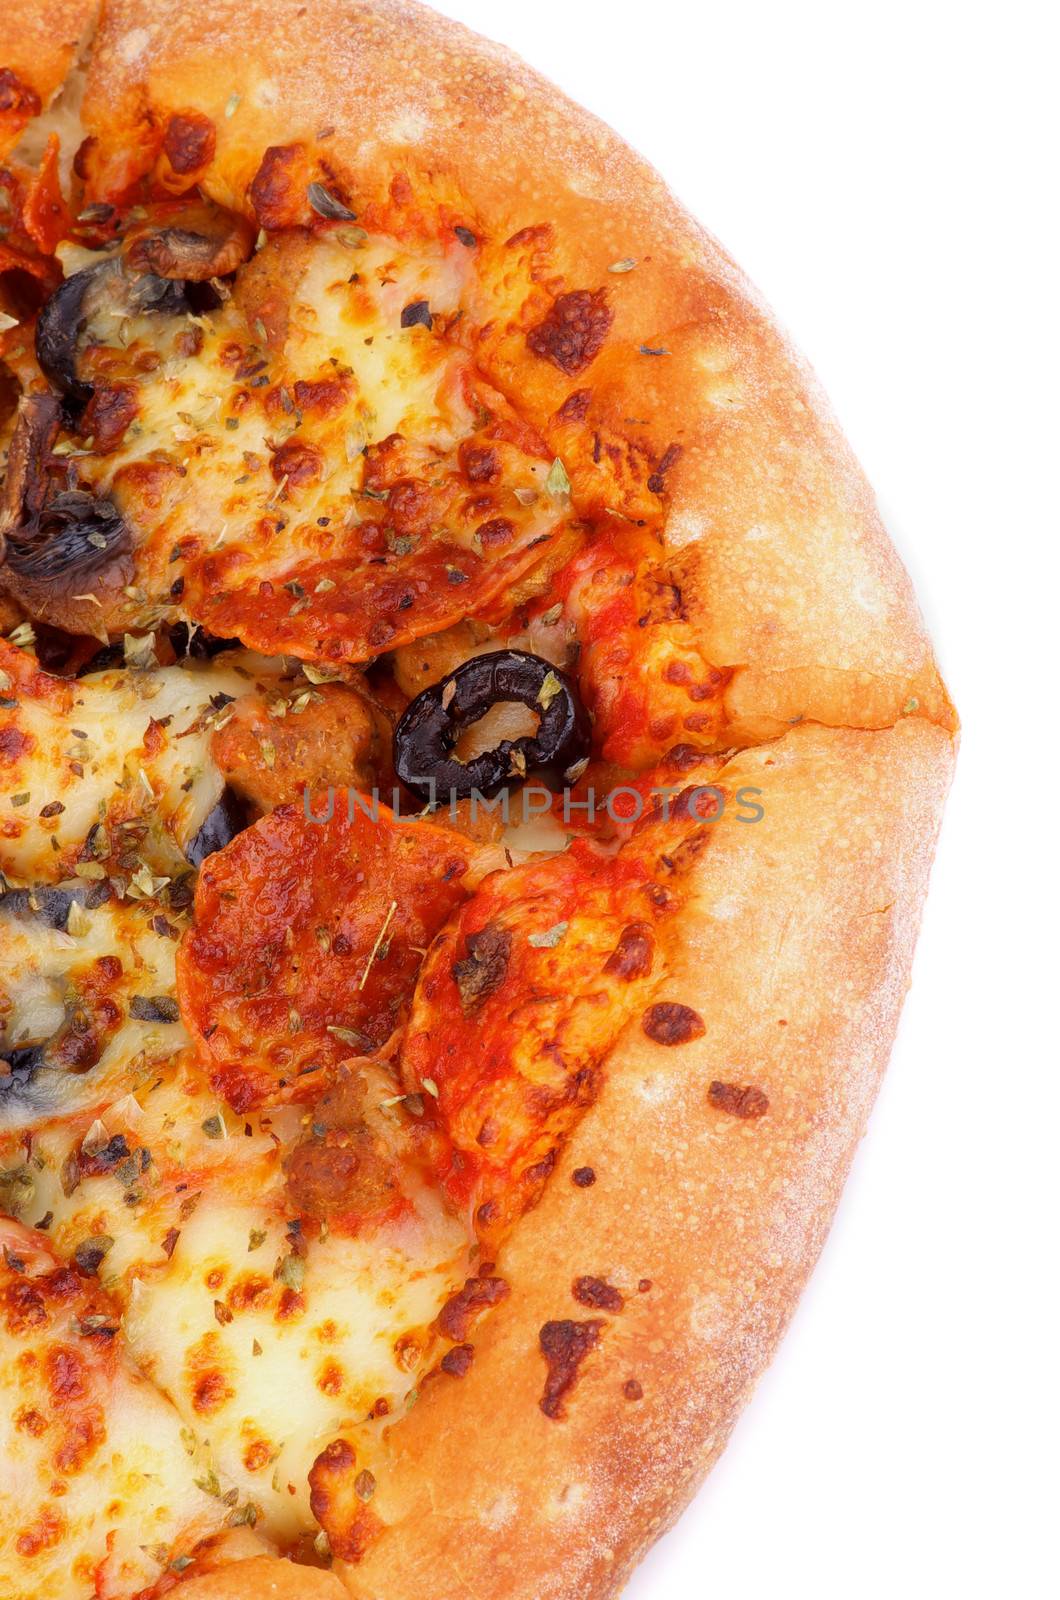 Freshly Baked Pepperoni Pizza with Black Olives, Tomatoes and Spices cross section on White background